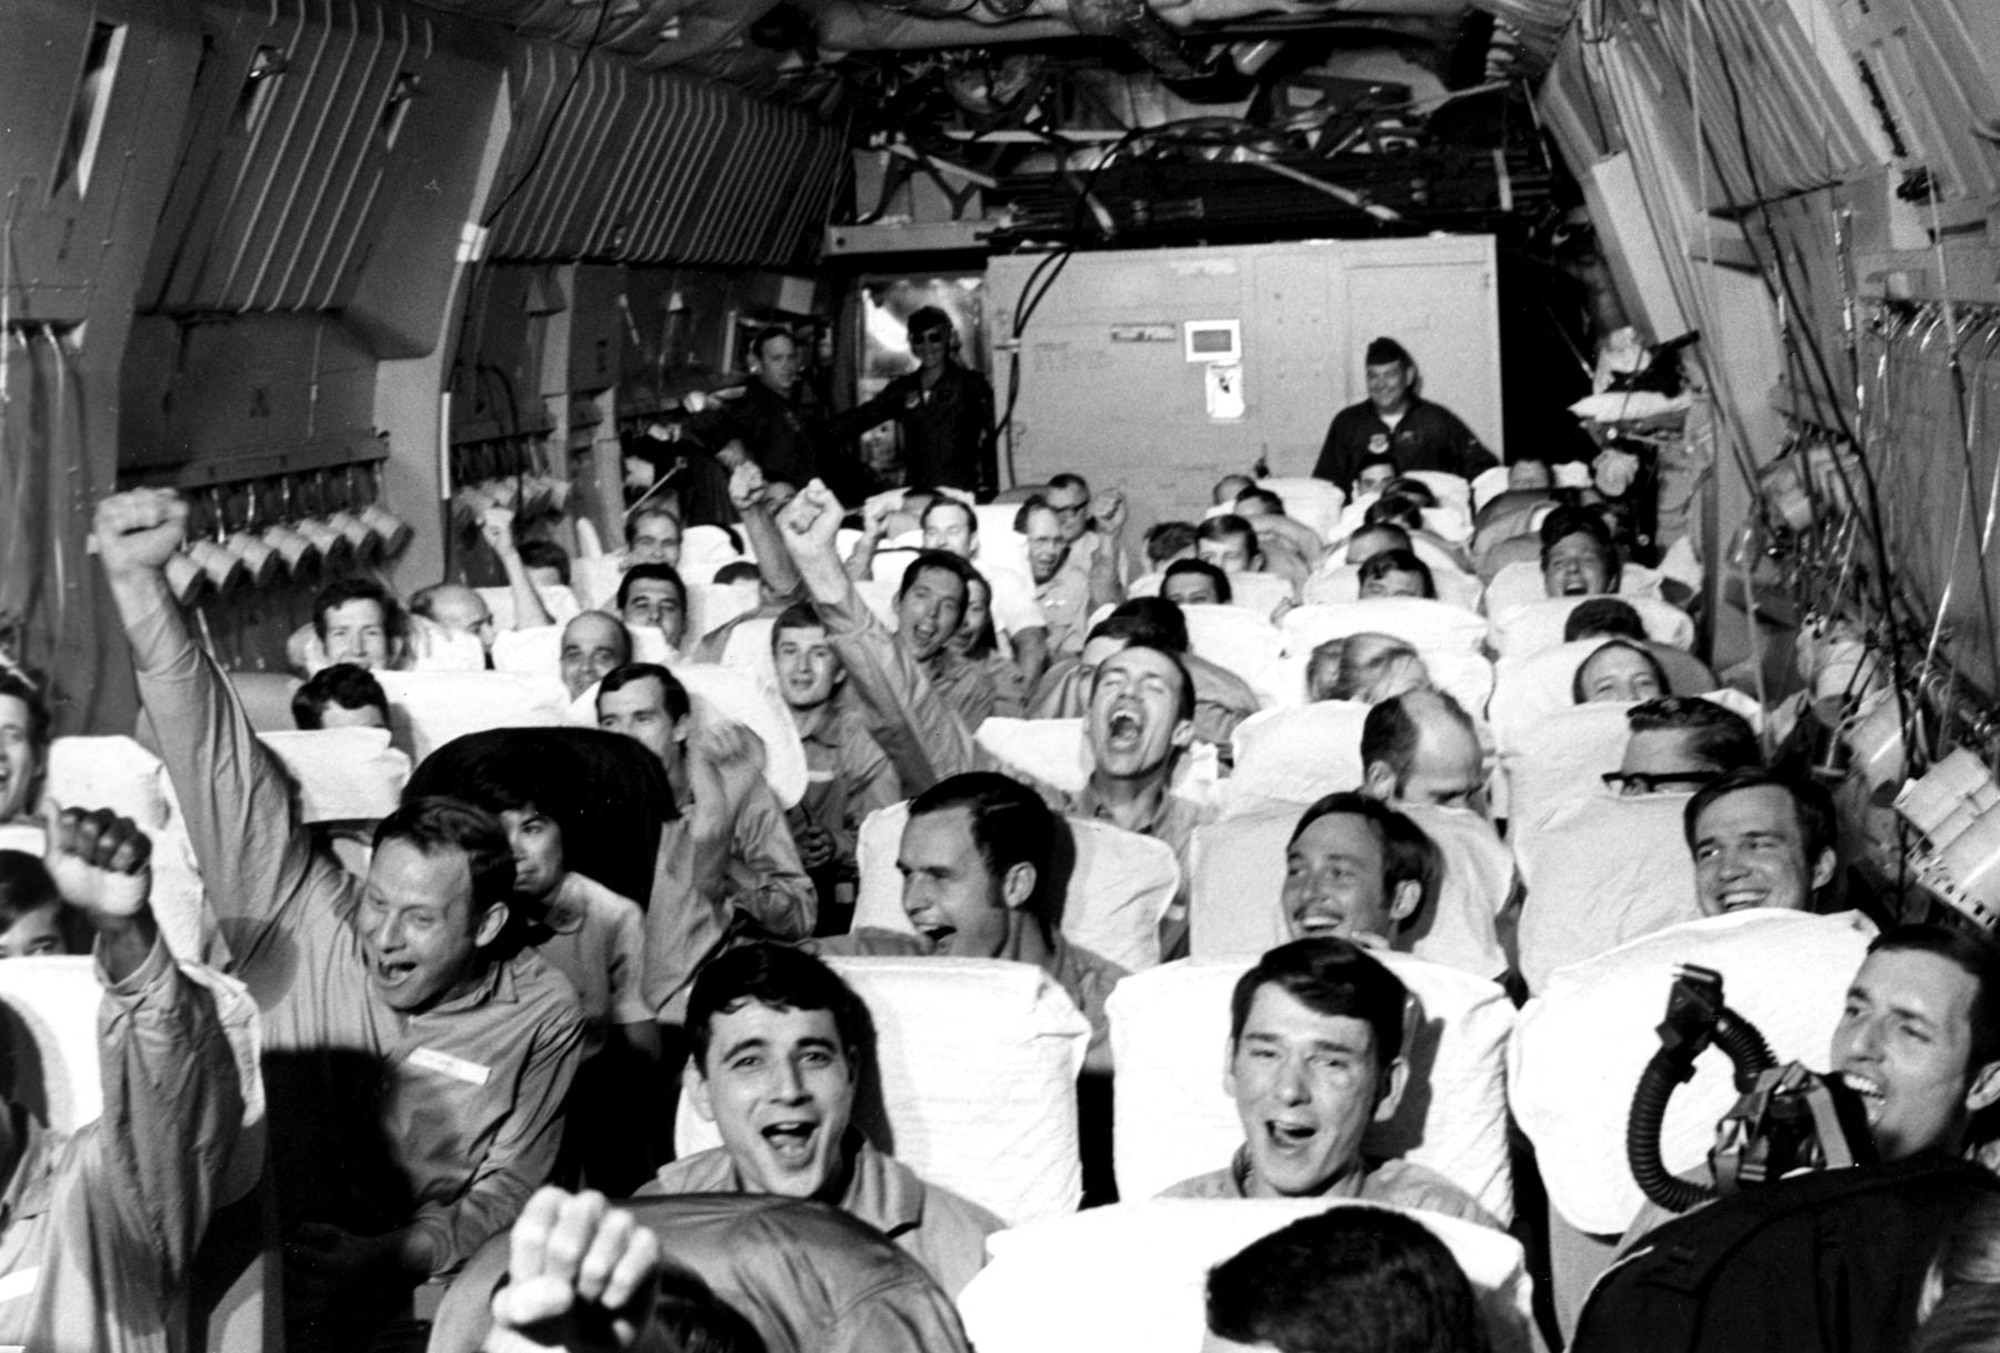 When the aircraft left the ground, the POWs knew they really were free. (U.S. Air Force photo)